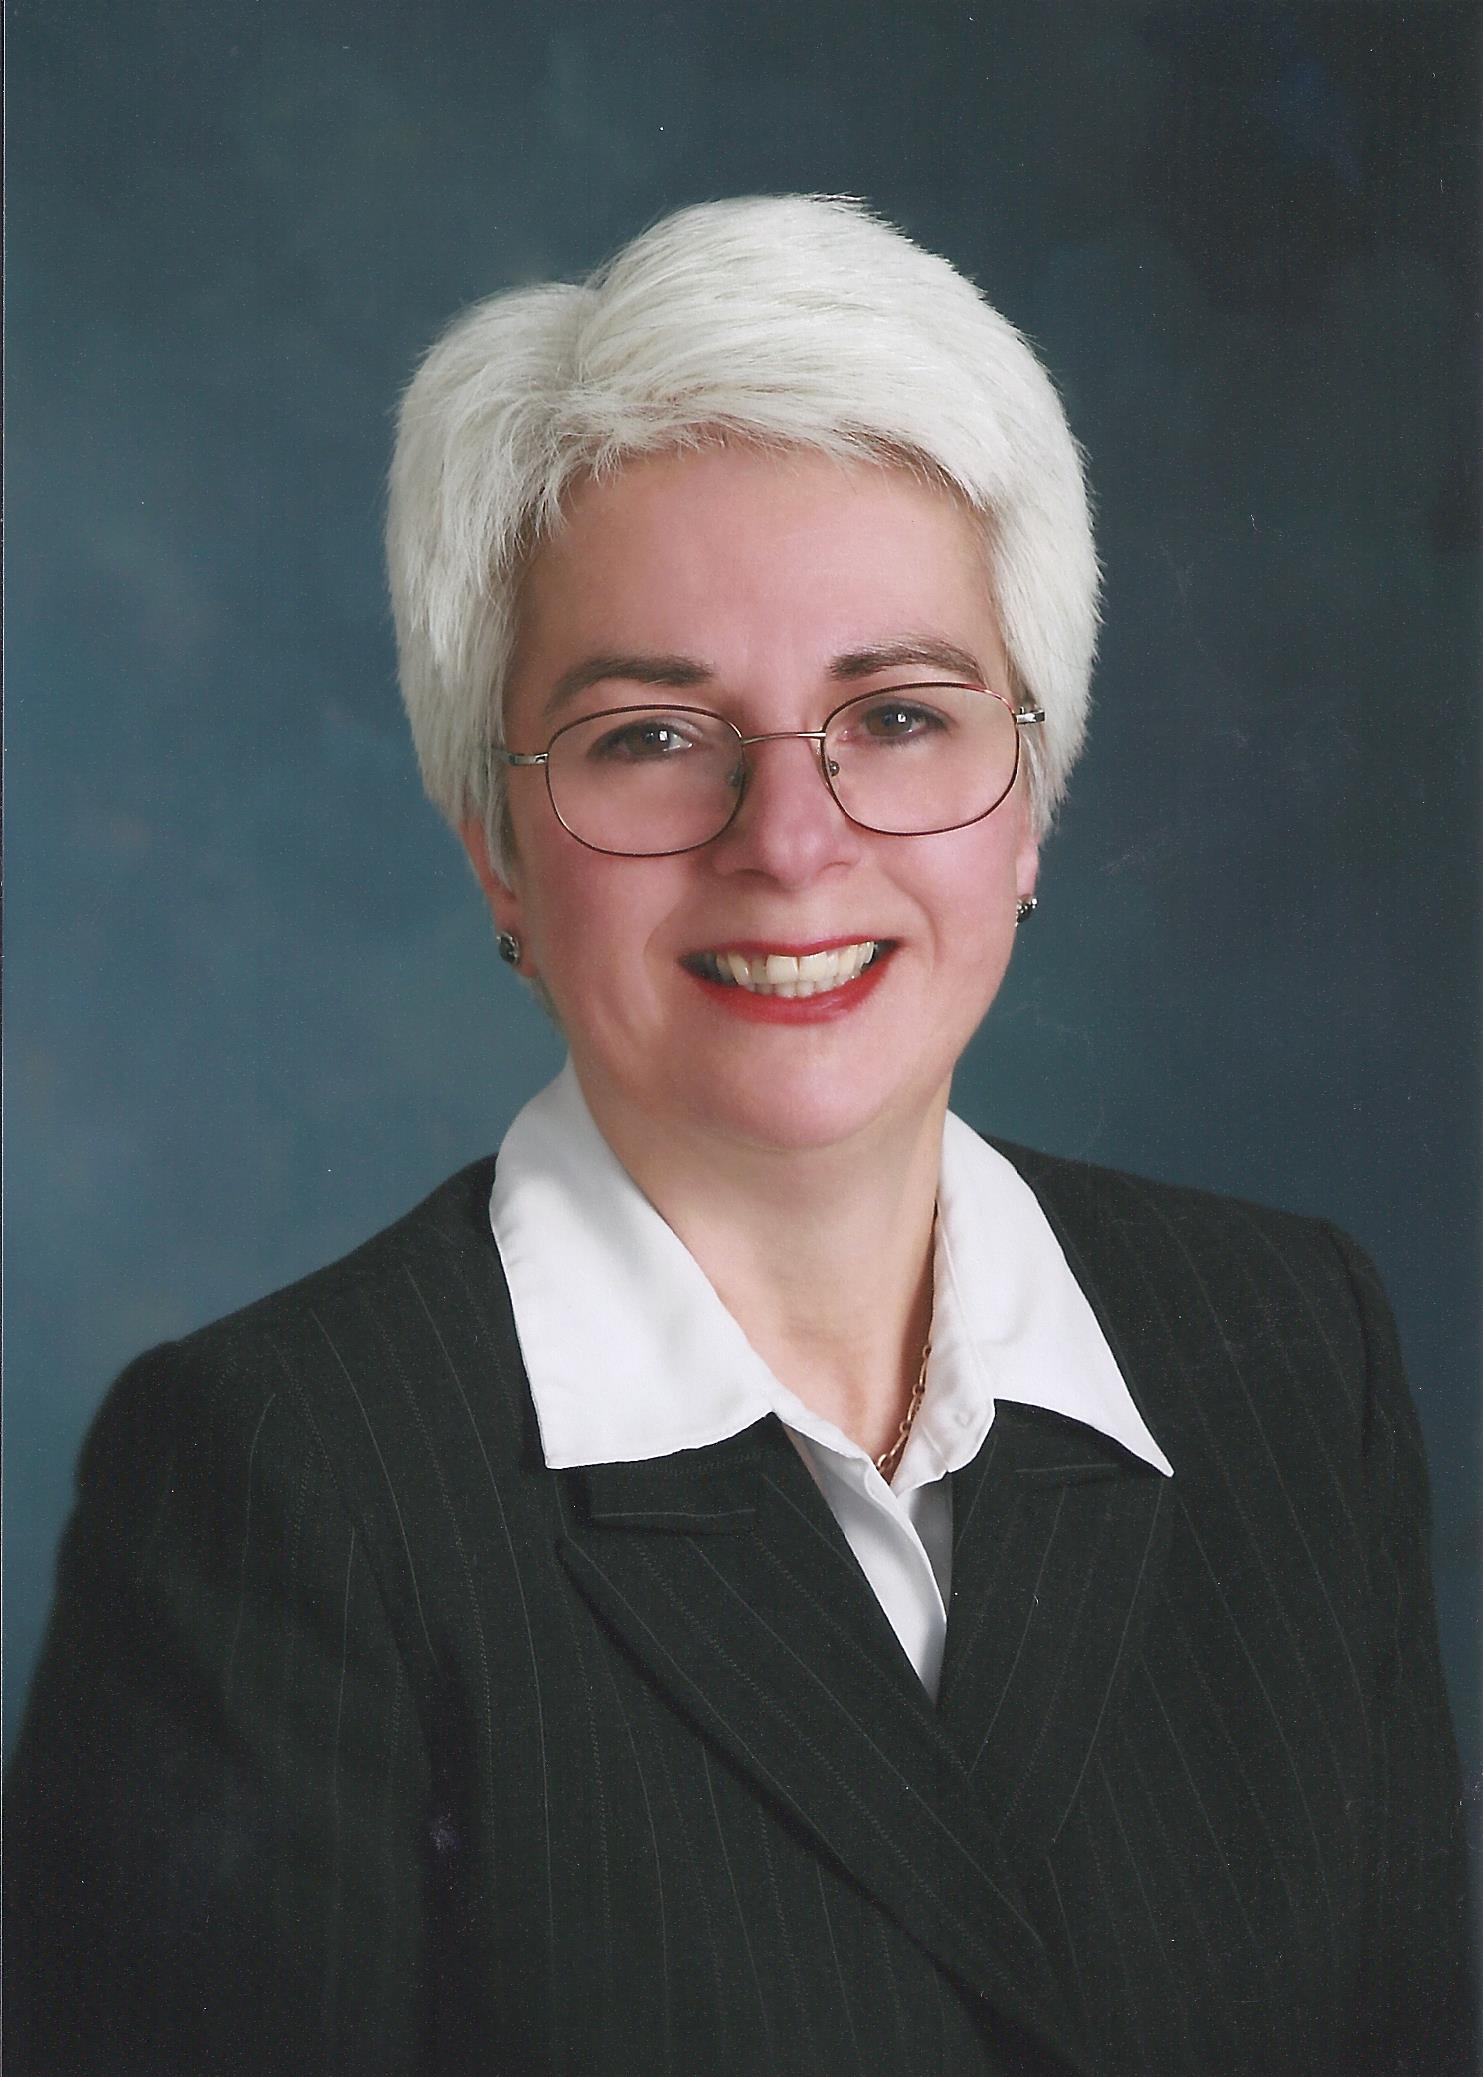 Dr. Rhonda Waskiewicz is the dean of Husson University’s College of Health and Education.